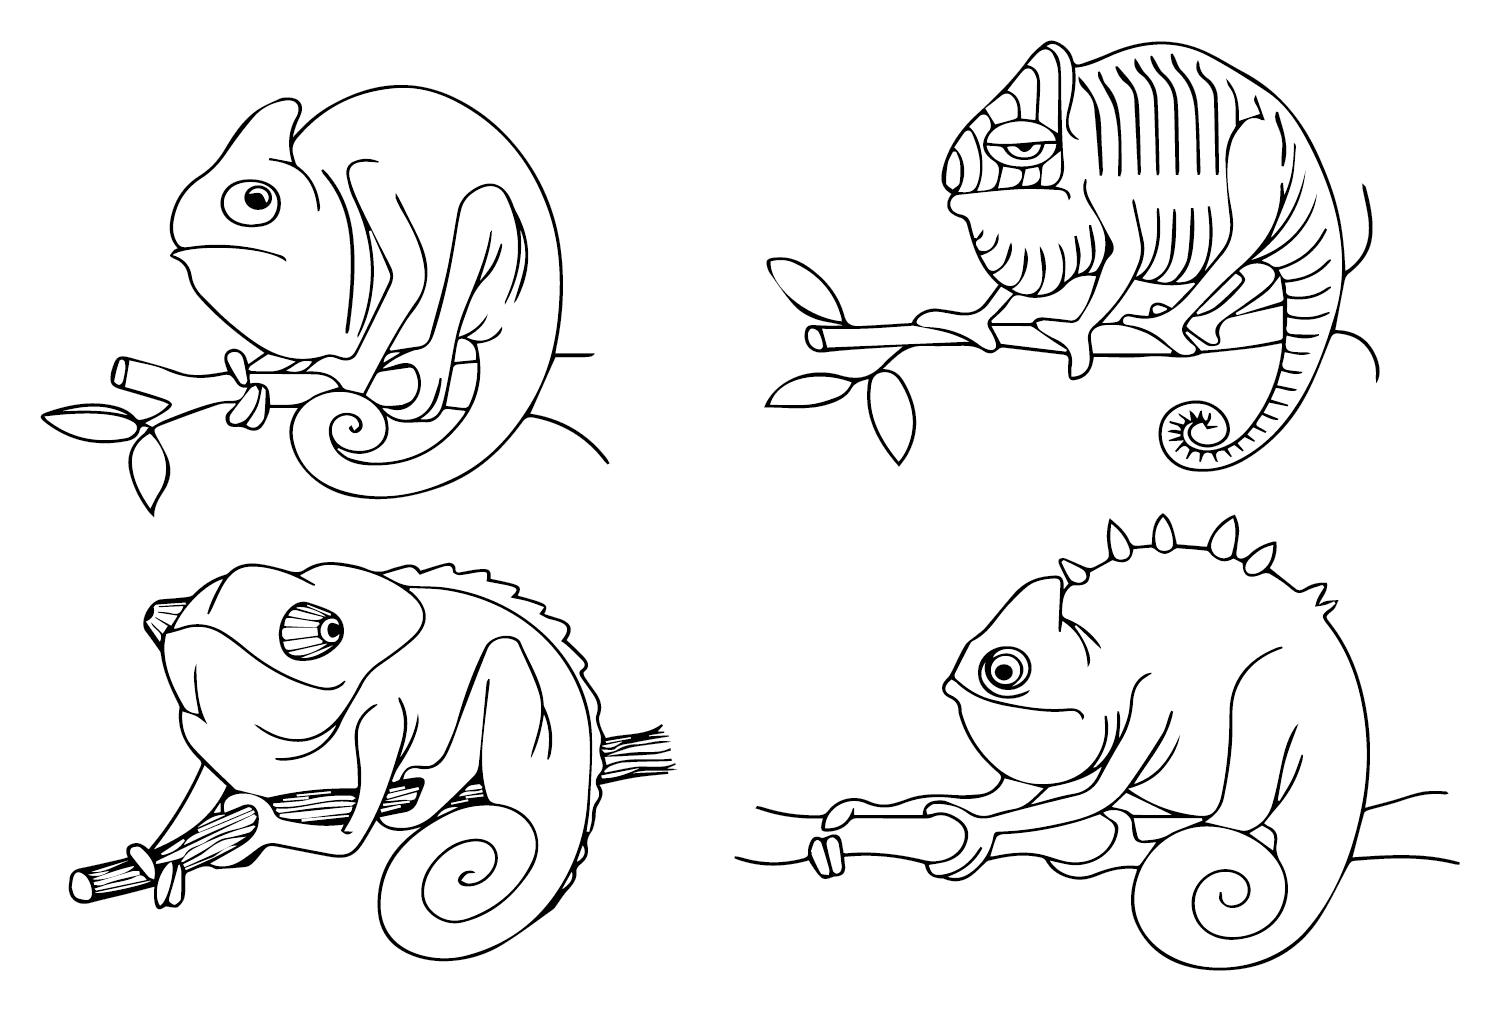 Coloring Pages of Chameleons from Chameleon